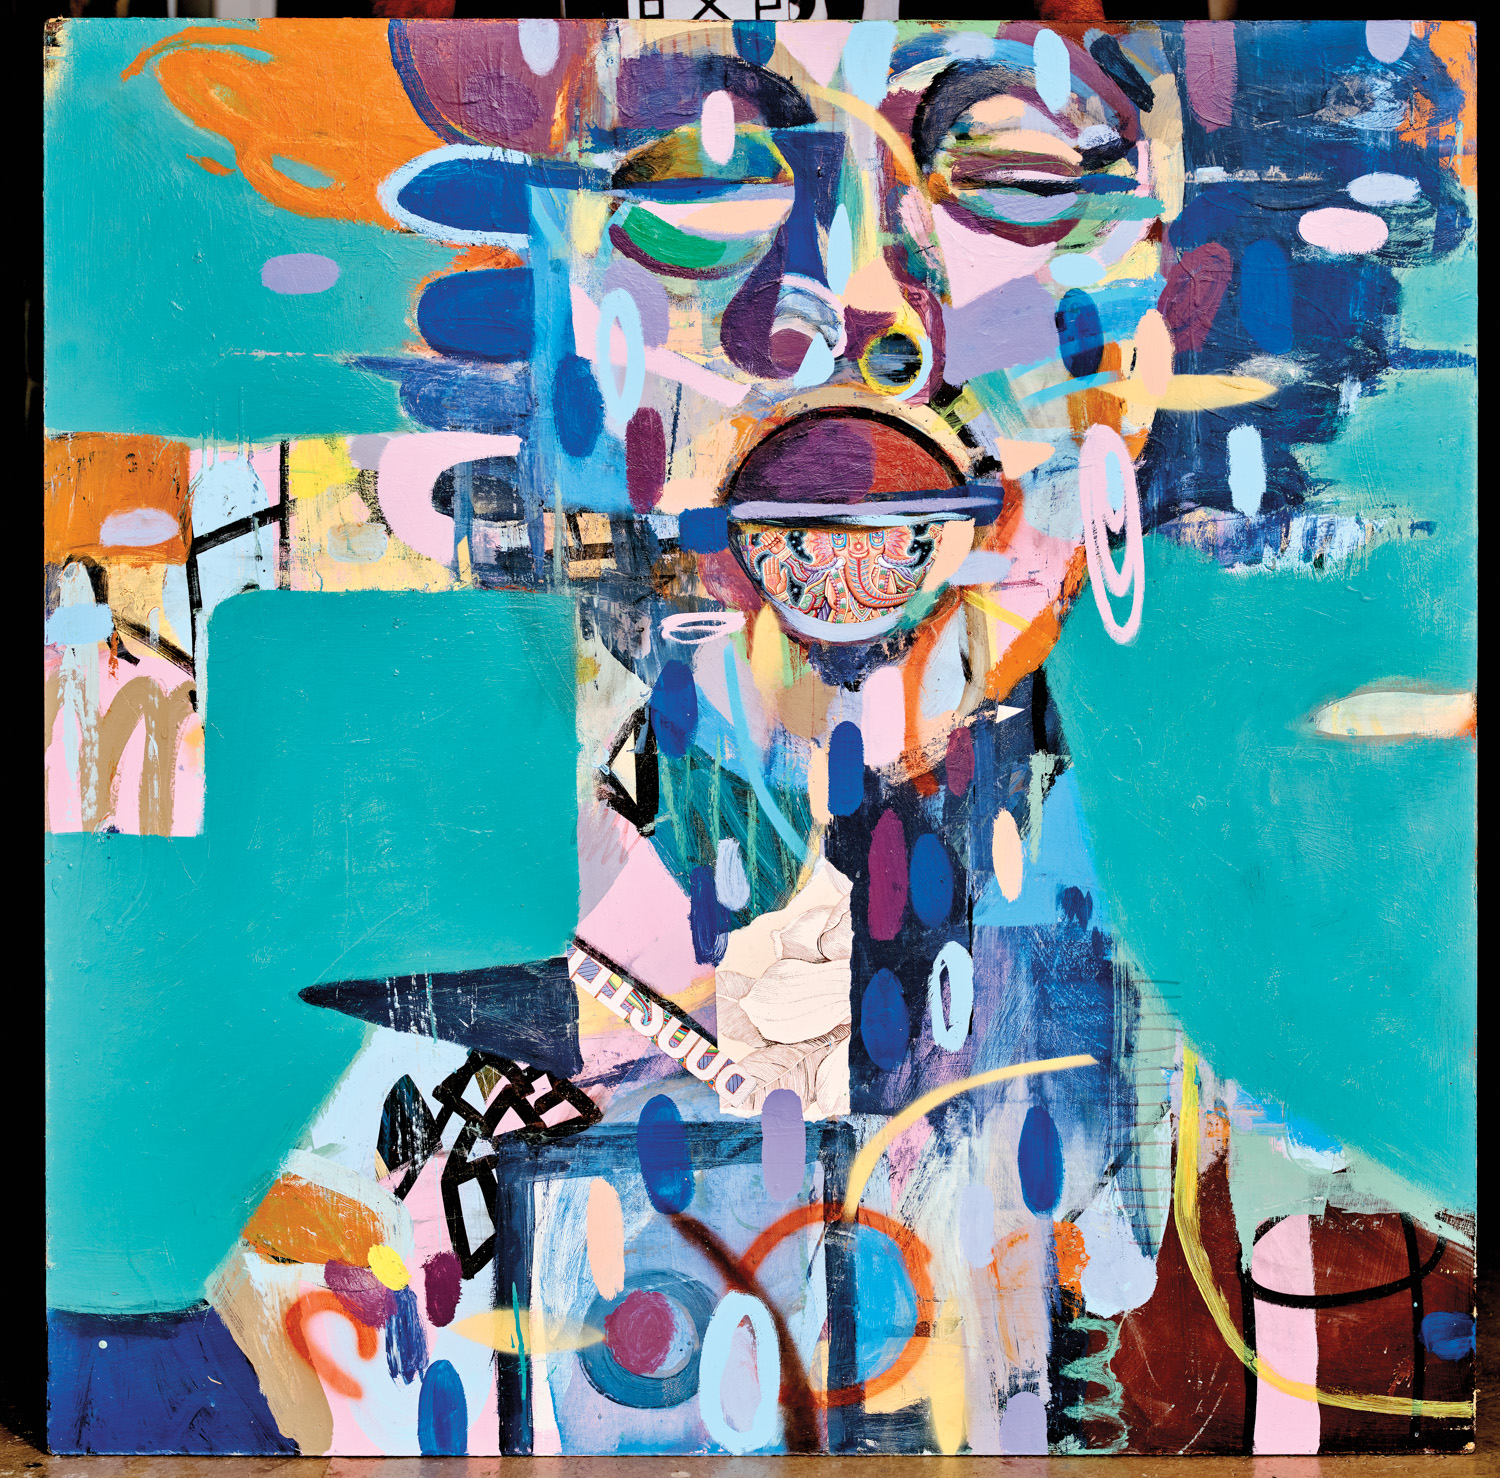 An artwork by Michael Gadlin representing a portrait in an abstract style.